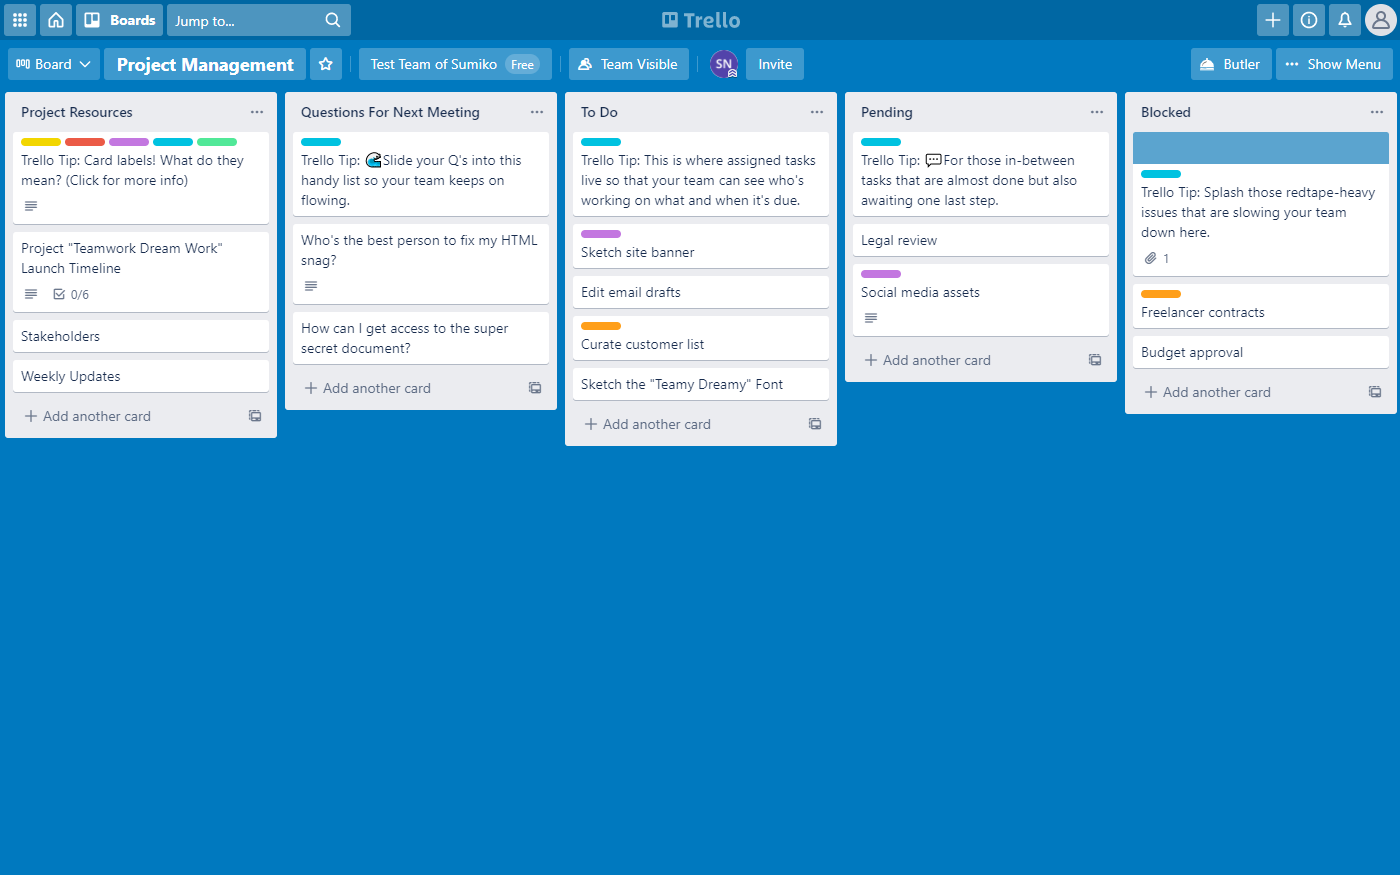  A screenshot of a Trello board with a title of 'Project Management' that displays three cards under the 'Next Meeting' column, five cards under the 'To Do' column, three cards under the 'Pending' column, one card under the 'Blocked' column, and two cards under the 'Weekly Updates' column.